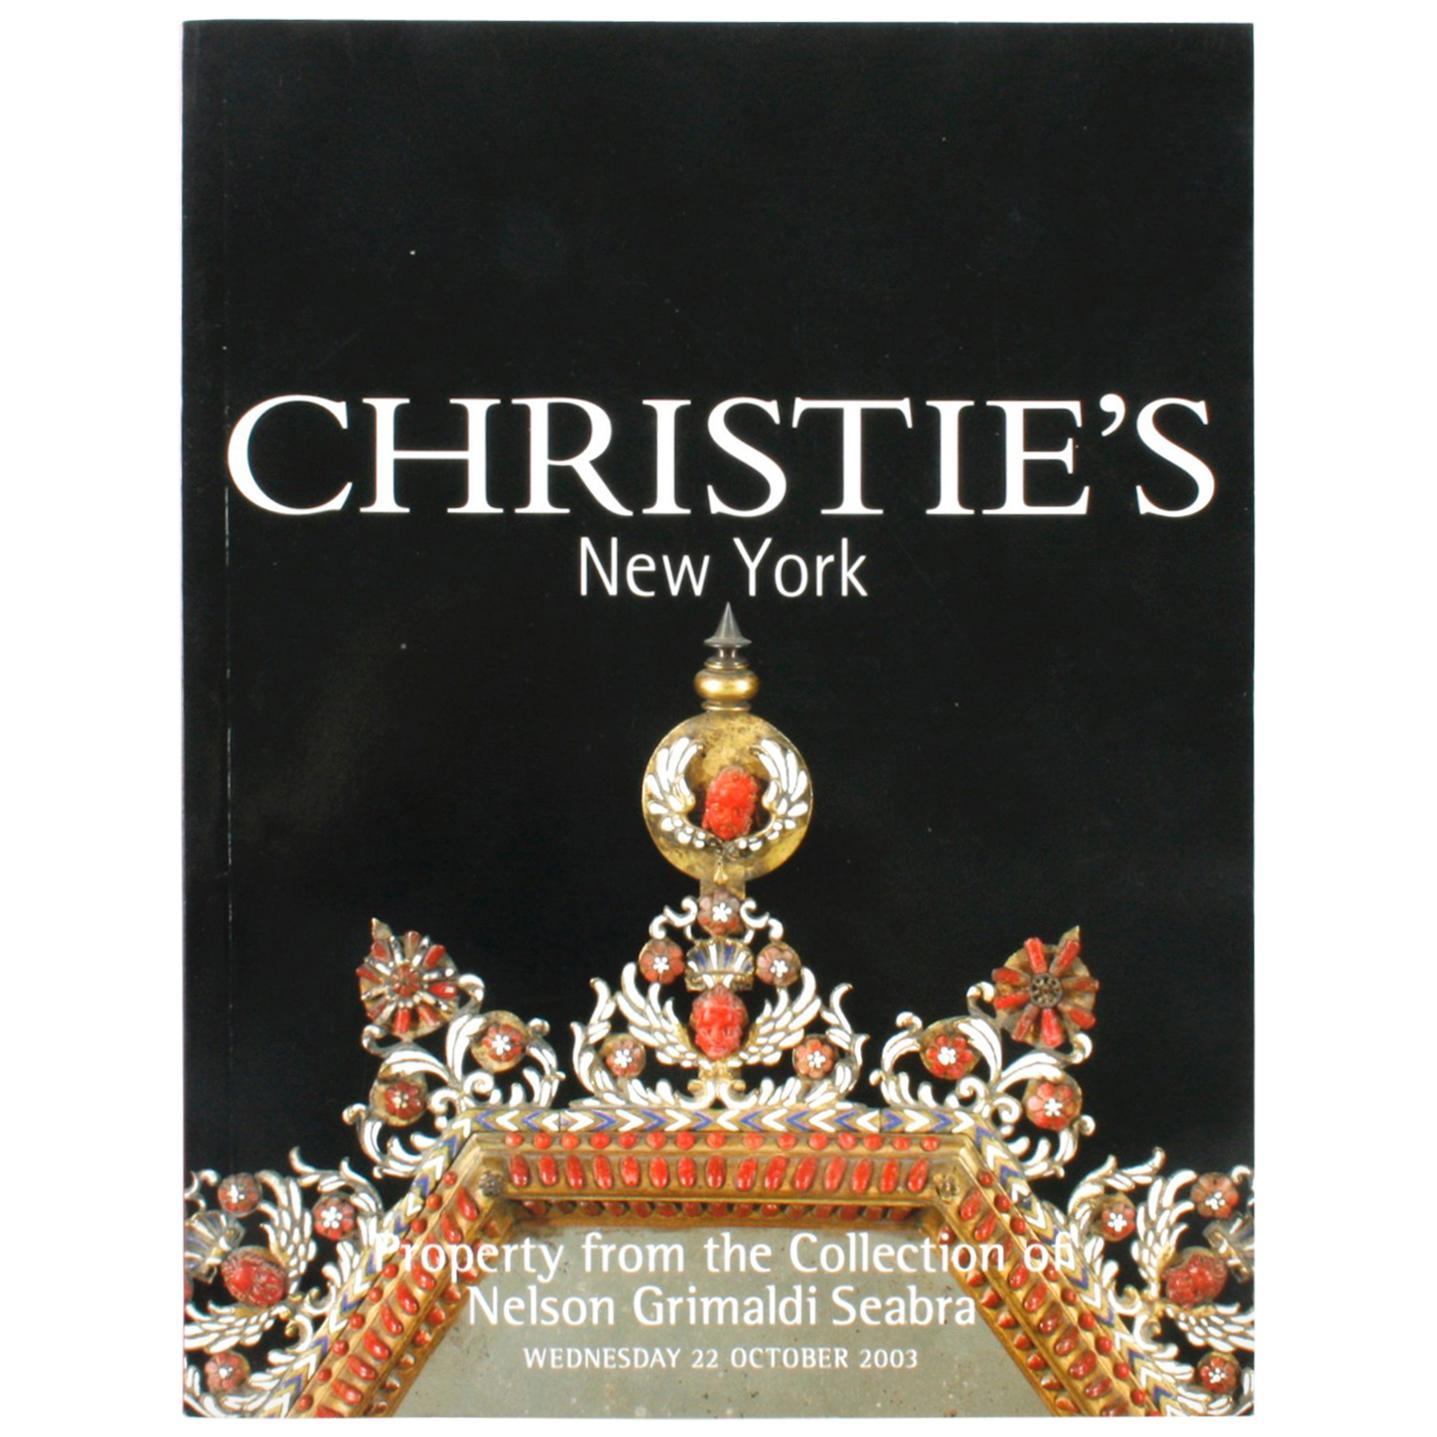 Christie's, Property from the Collection of Nelson Grimaldi Seabra, October 2003